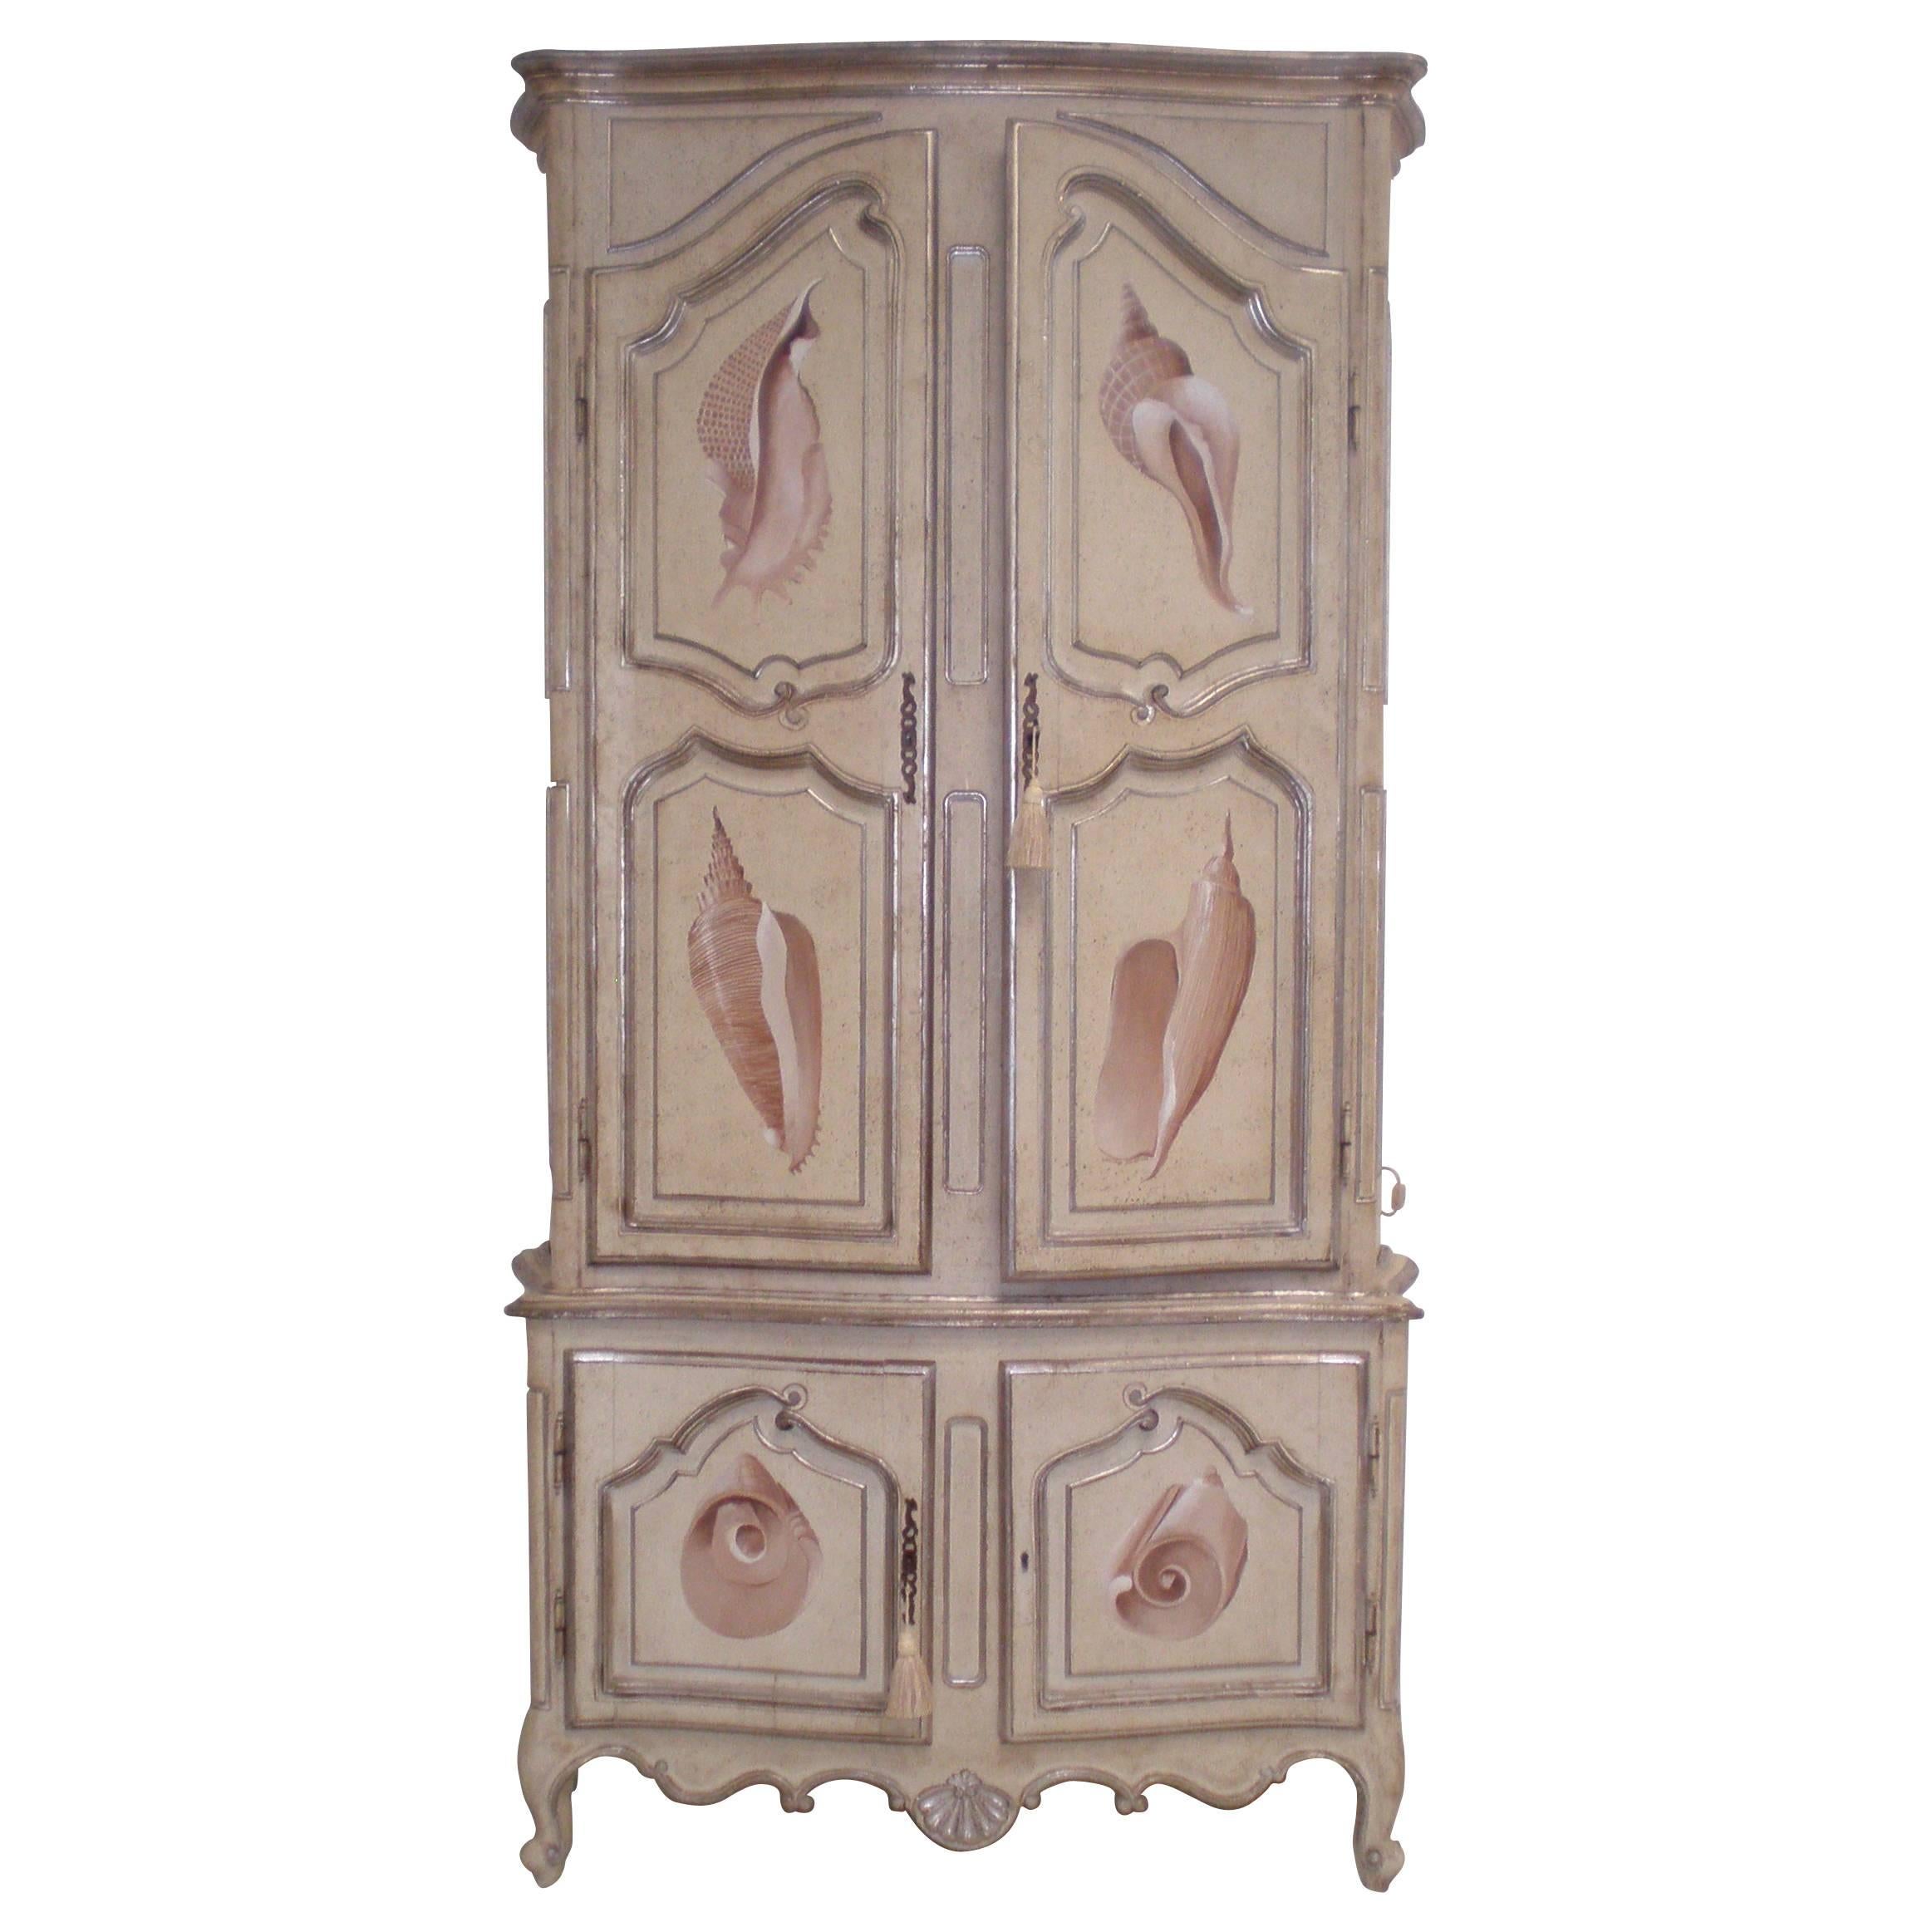 Vintage Glamorous Hand-Painted Shell Illuminated Armoire Display Cabinet